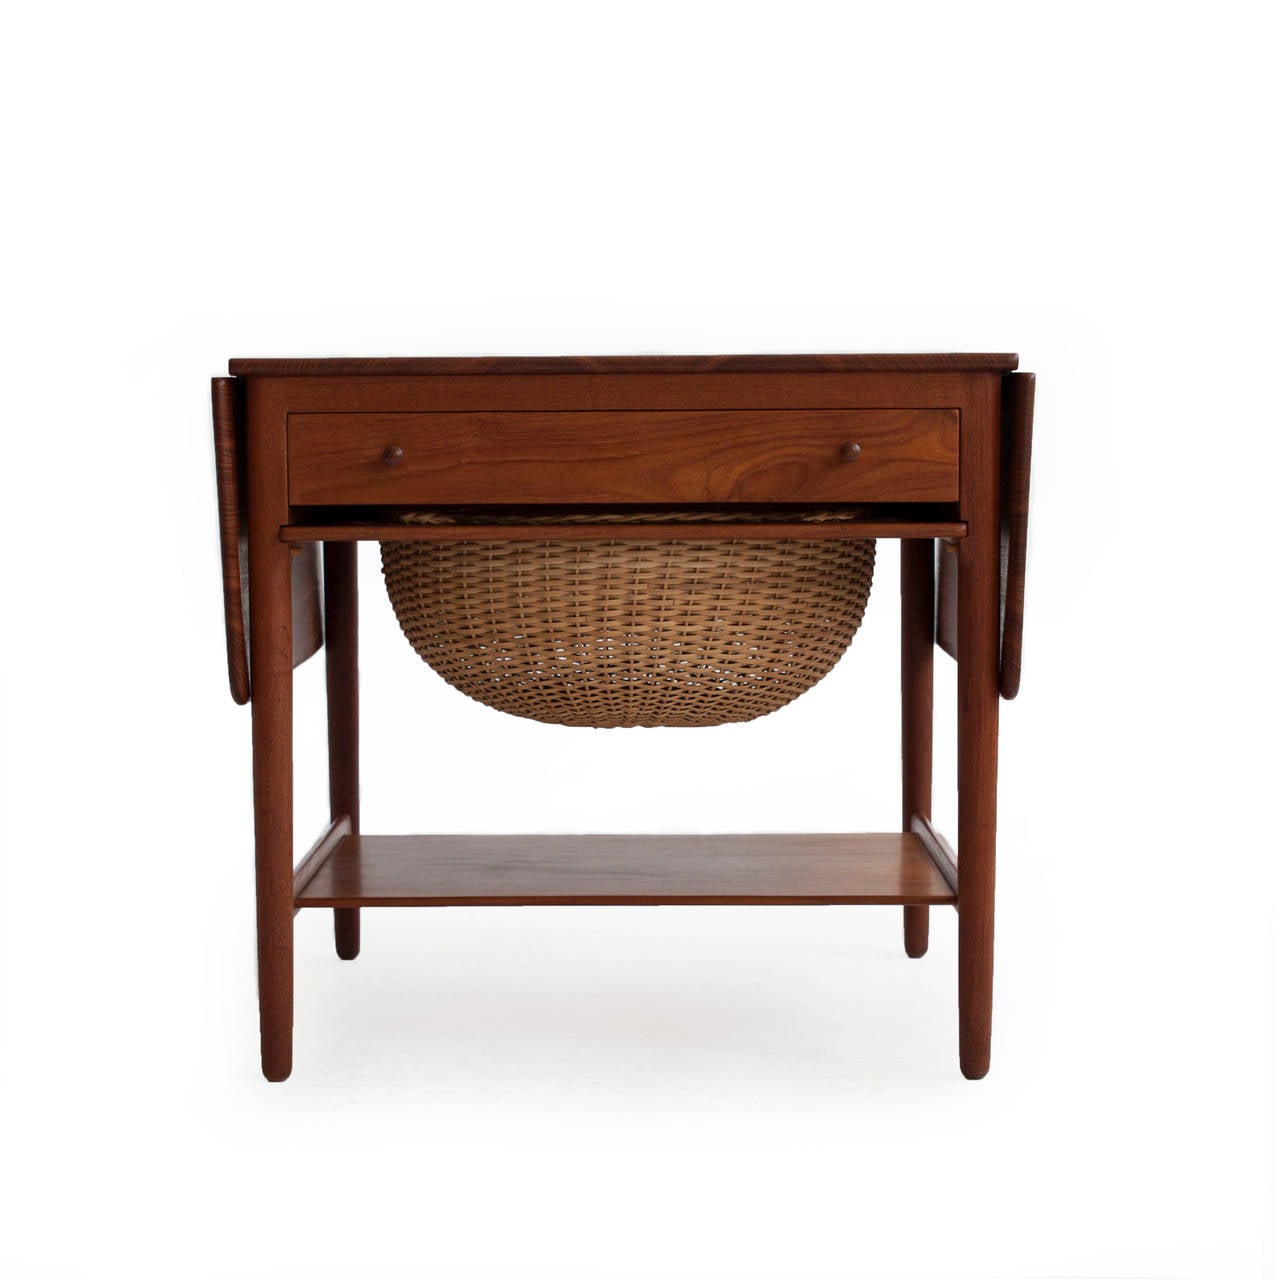 Hans J. Wegner sewing table in teak with two drop-leaves, front drawer and a woven cane basket.

Designed by Hans J. Wegner, 1950, manufactured and marked by cabinetmaker Andreas Tuck, model AT33.

Excellent condition.